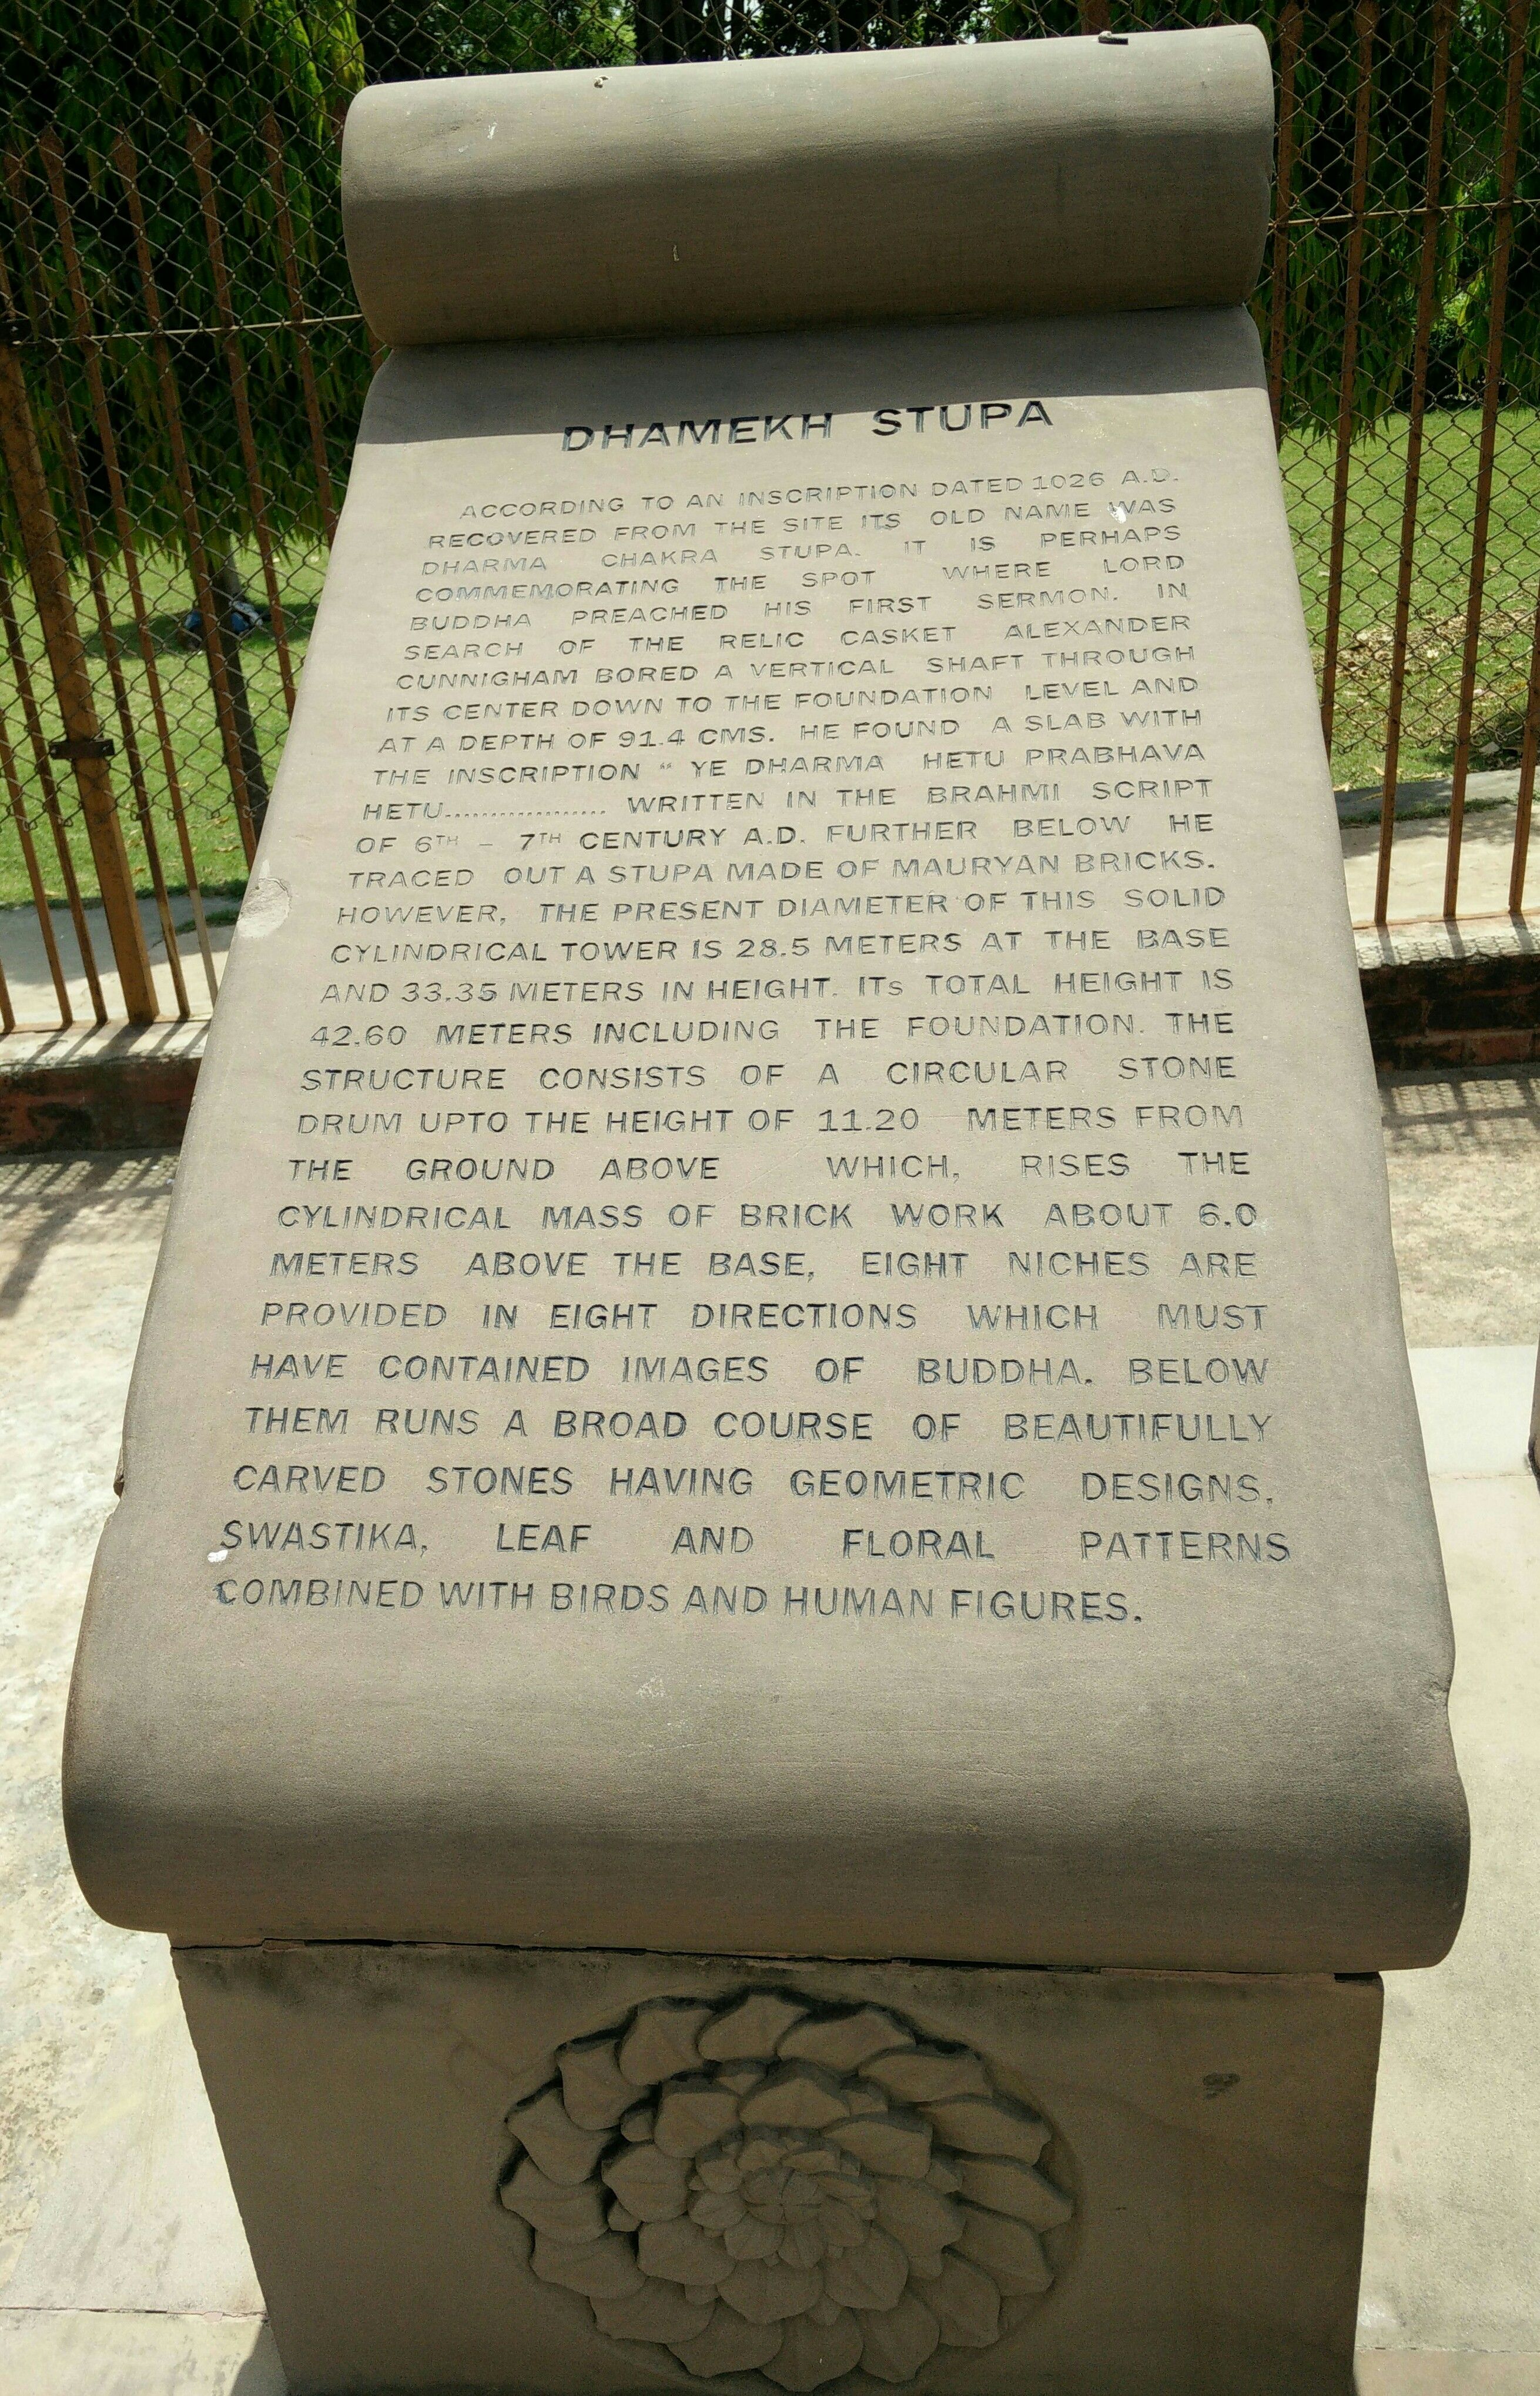 The description of  Dhamekh Stupa at the site.